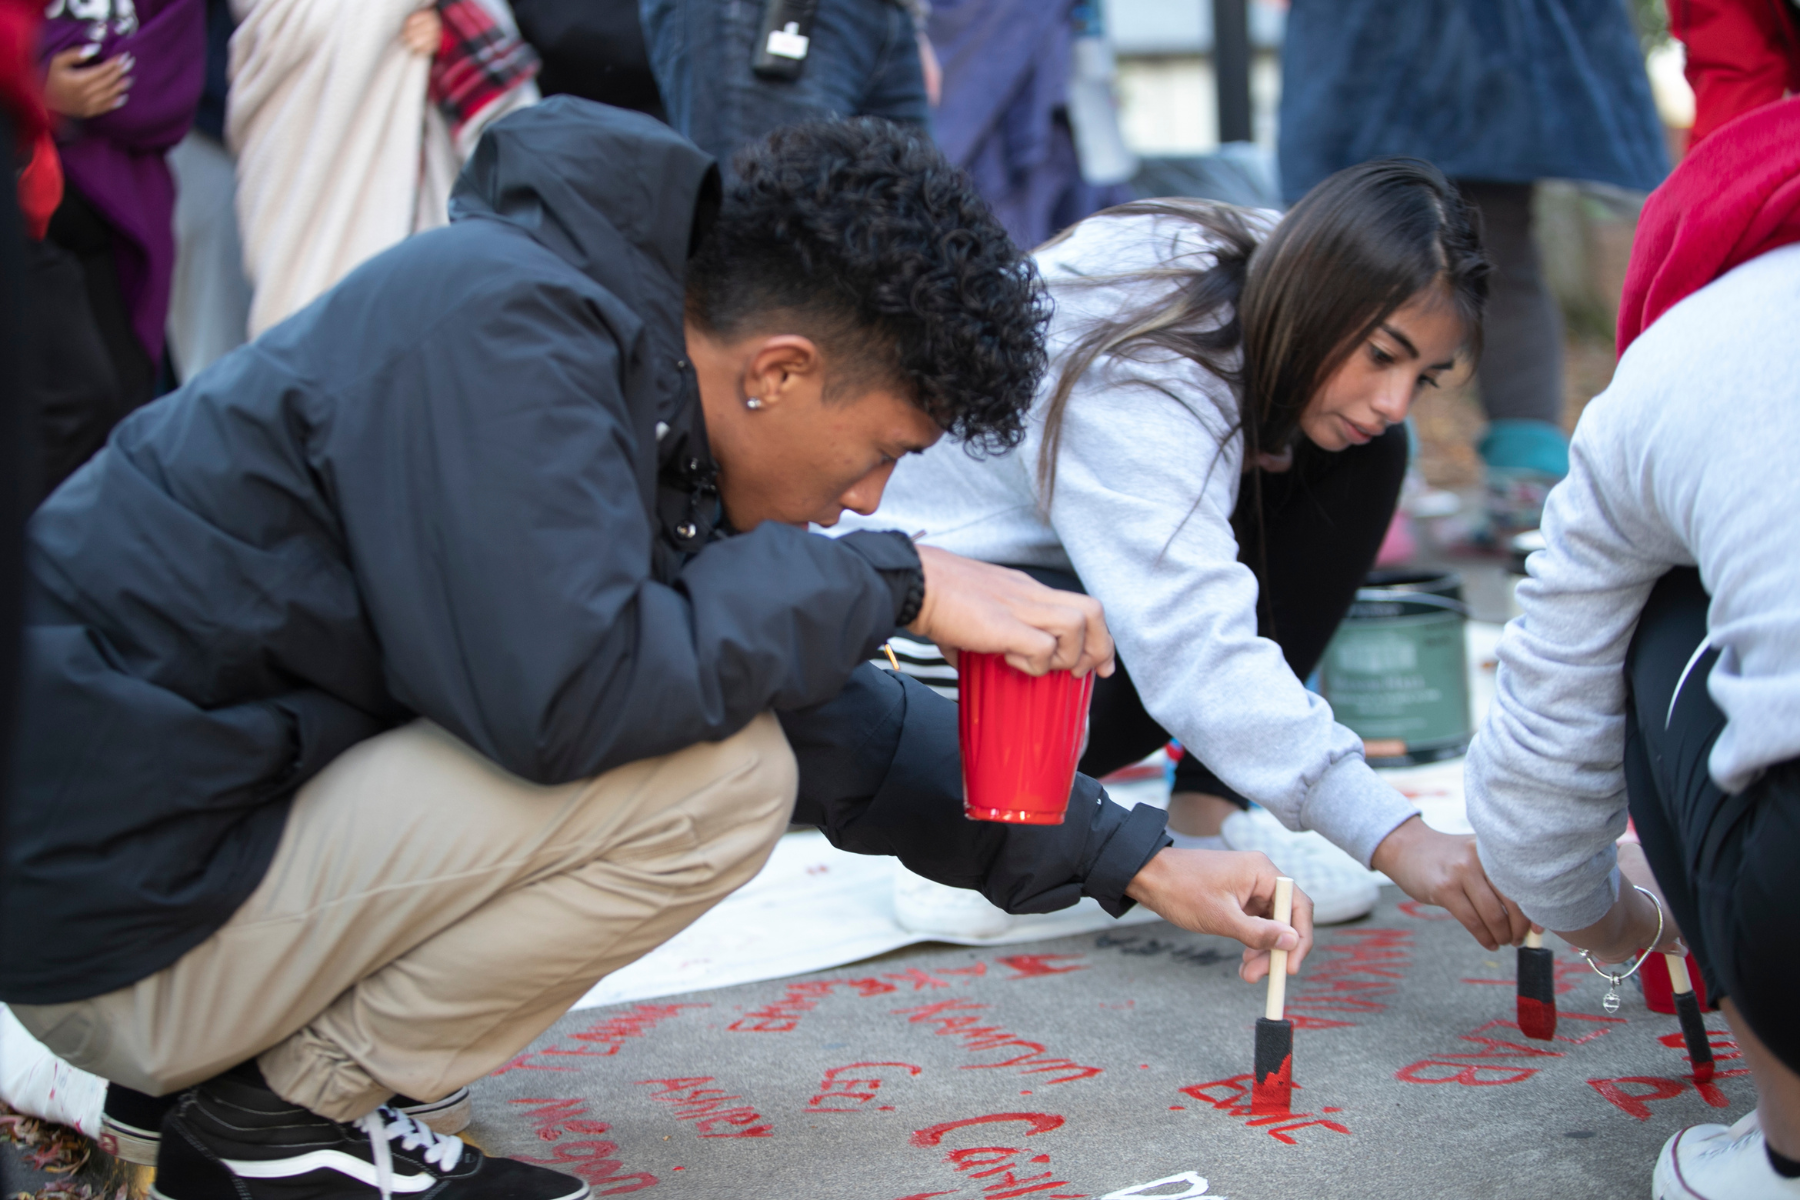 Man squatting near the sidewalk using red paint to paint their name on the sidewalk.